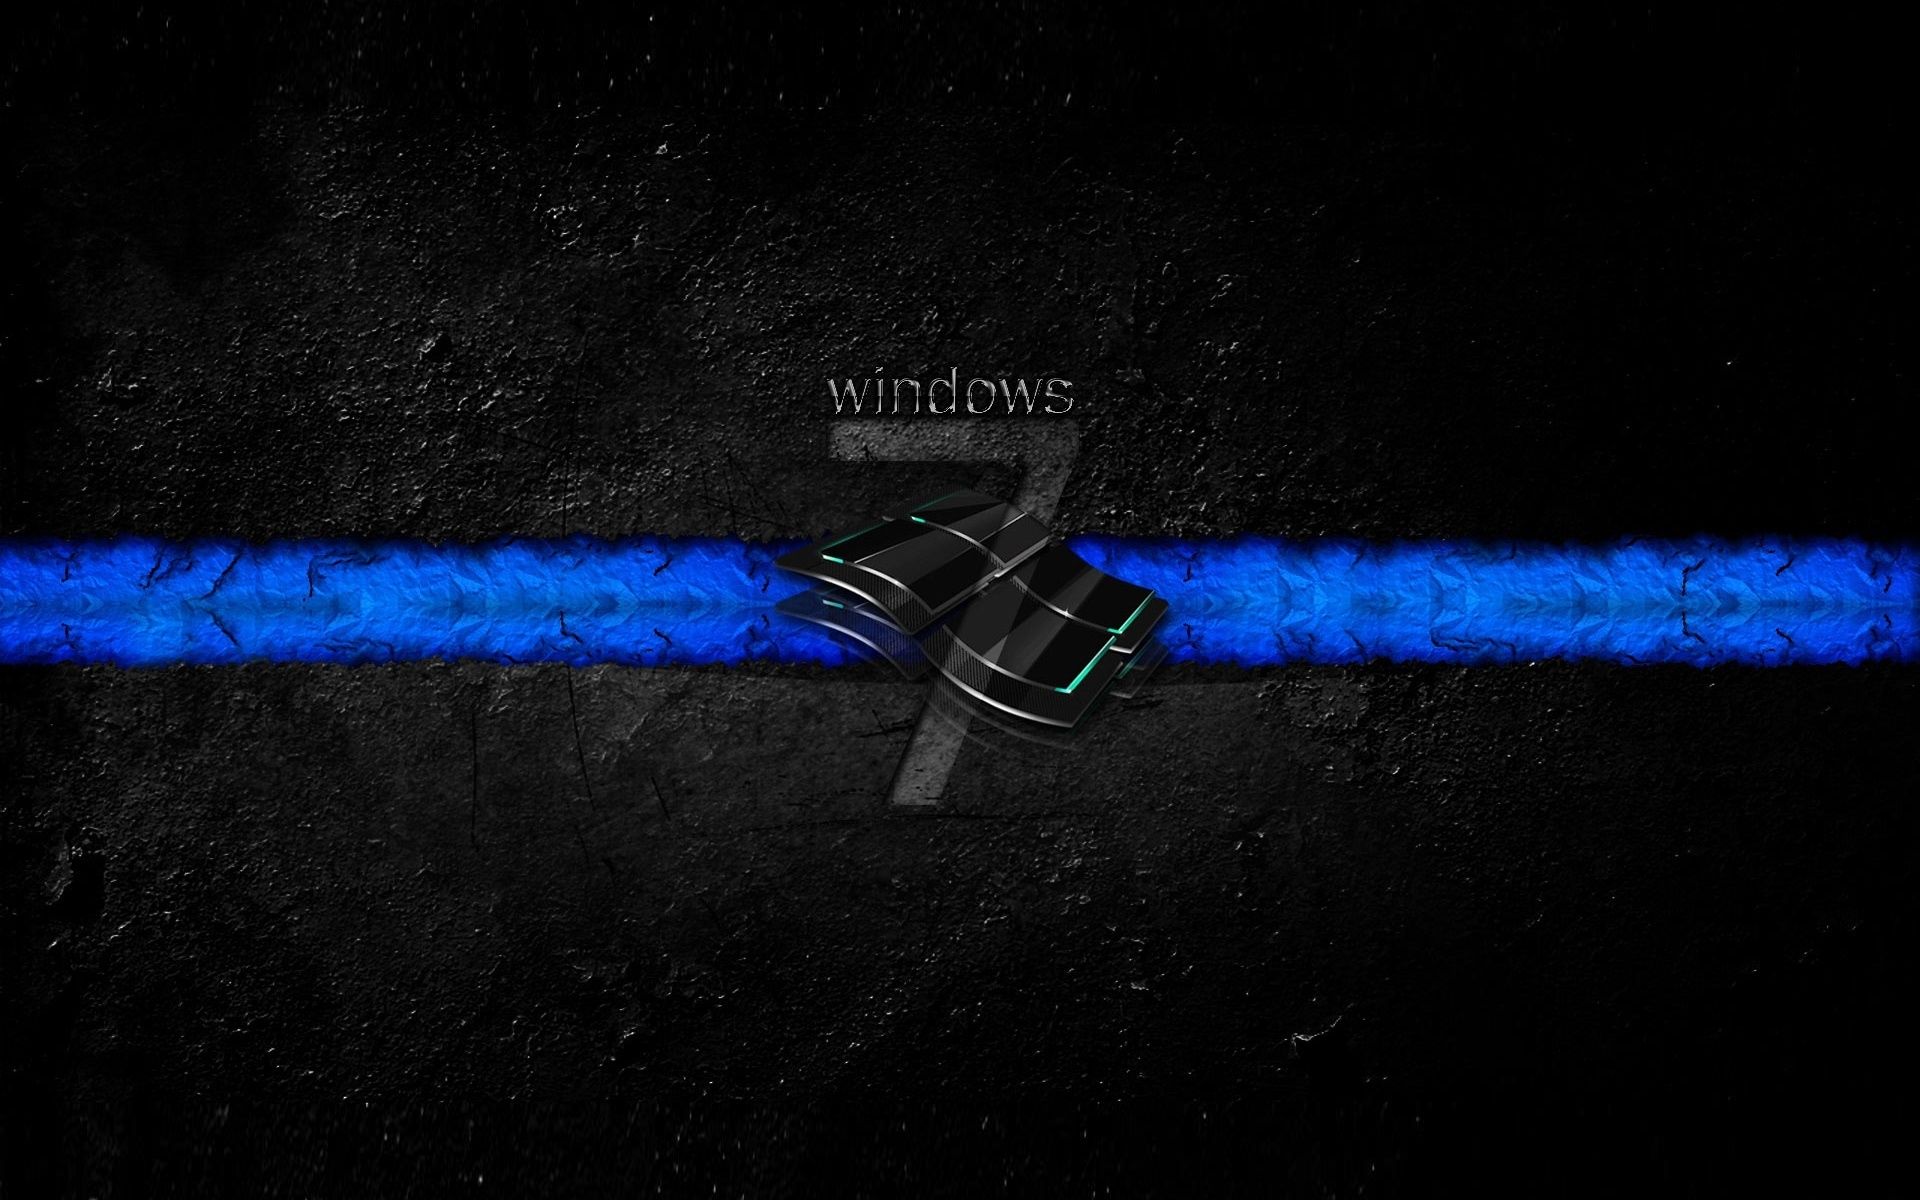 Wallpaper. Windows. photo. picture. blue striped, seven, the overlay image